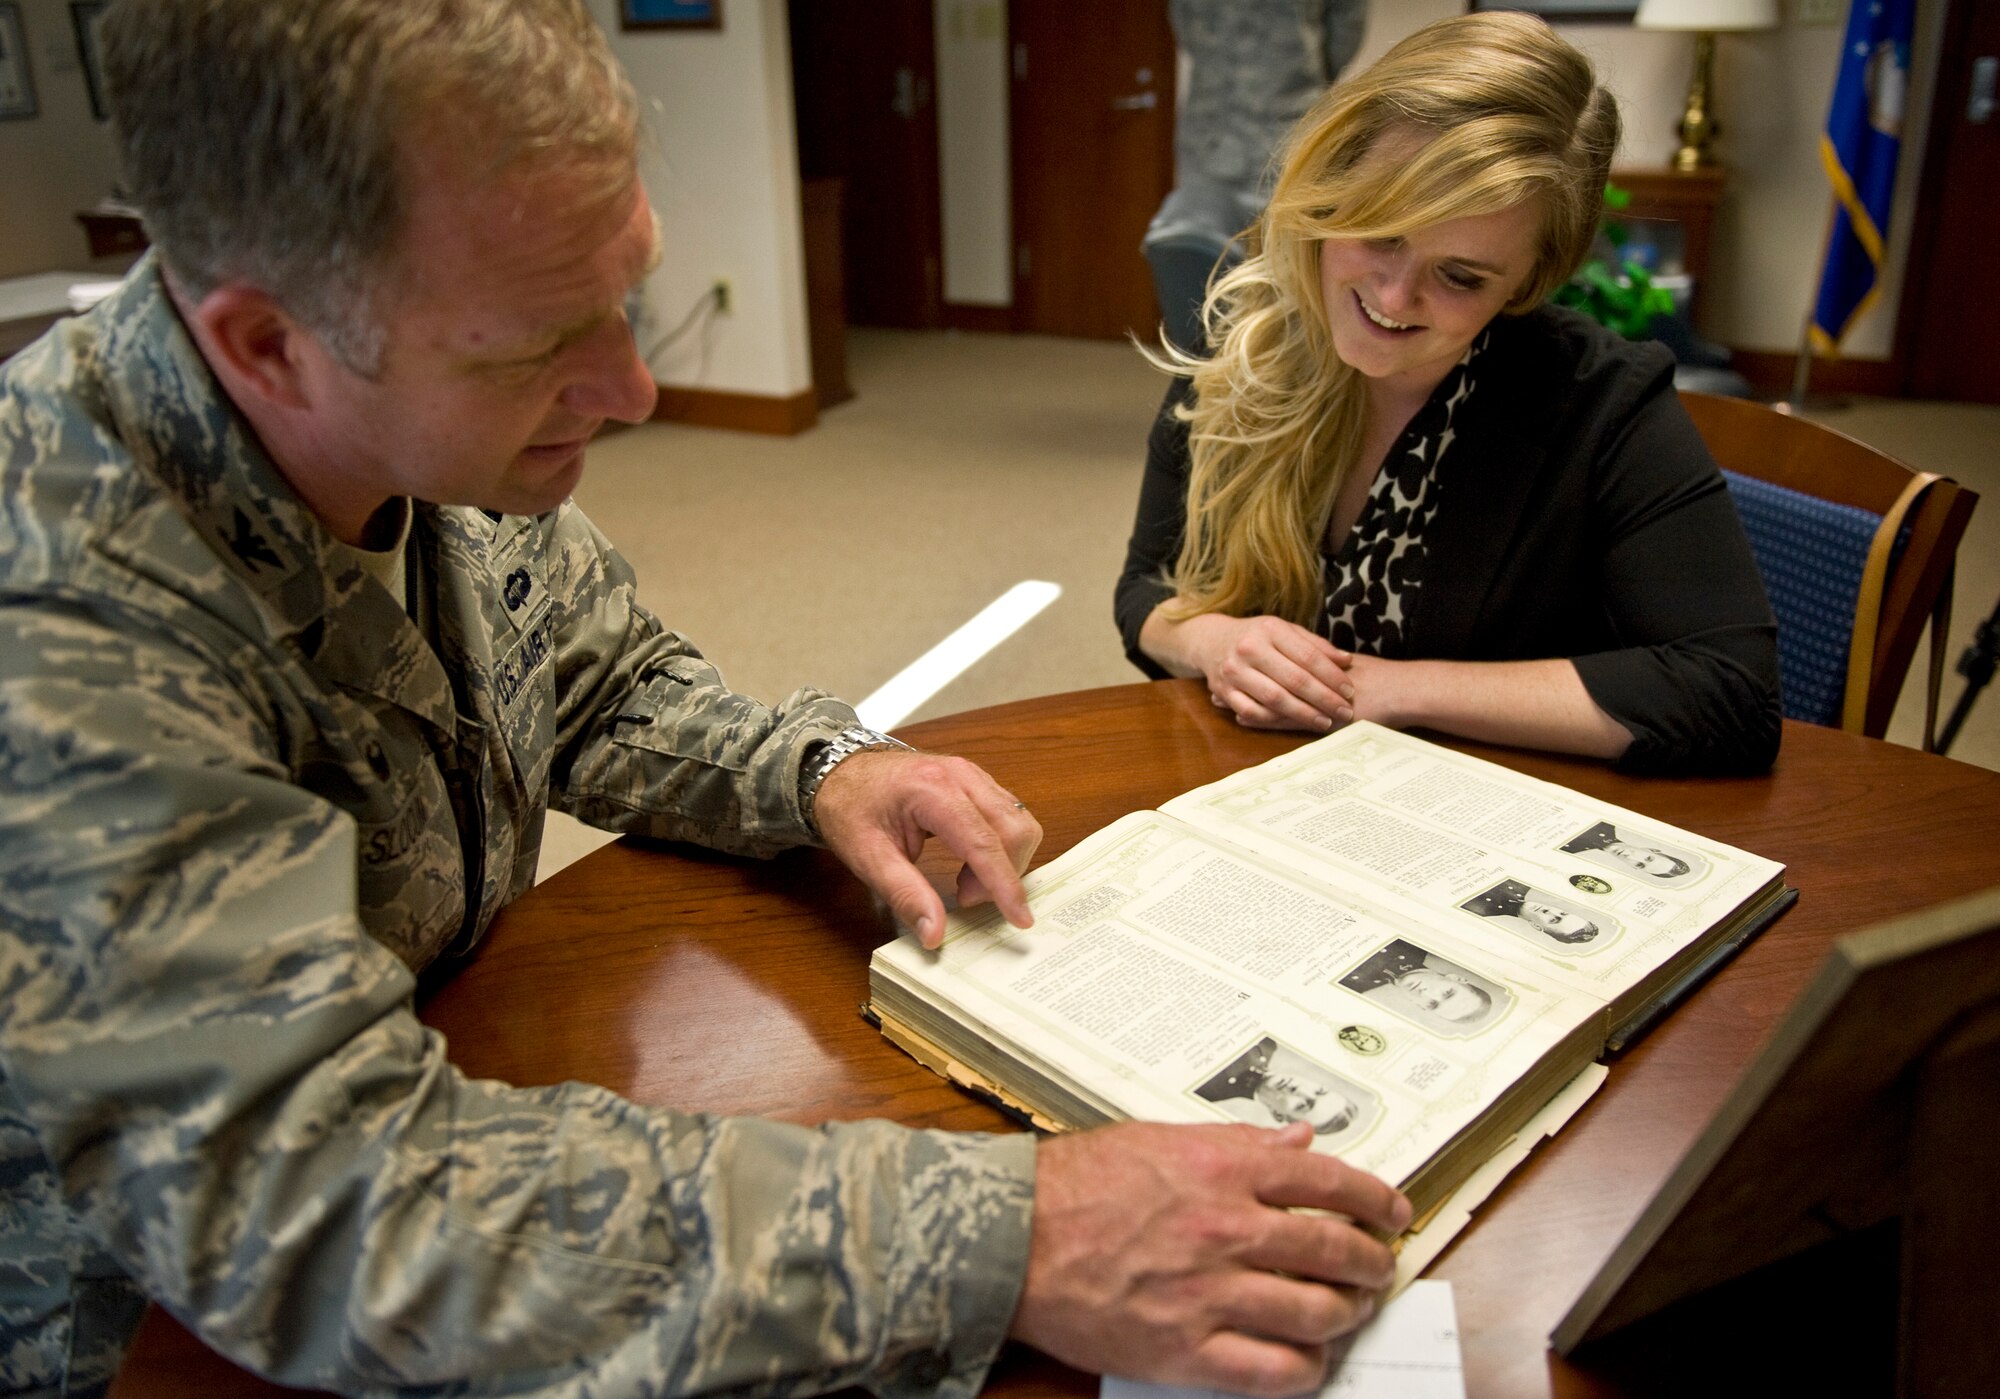 Col. Mark Slocum looks at the yearbook of Seymour Johnson Air Force Base’s namesake, Navy Lt. Seymour Johnson, with Jaime Thompson Oct. 17, 2014, at Seymour Johnson AFB, N.C. Slocum is the 4th Fighter Wing commander and Thompson is Seymour Johnson’s great-granddaughter. During her visit, Thompson familiarized herself with her great-grandfather’s and the base’s history. For the first, she was able to discover the full legacy left behind by her great-grandfather. (U.S. Air Force photo/Airman 1st Class Aaron Jenne) 